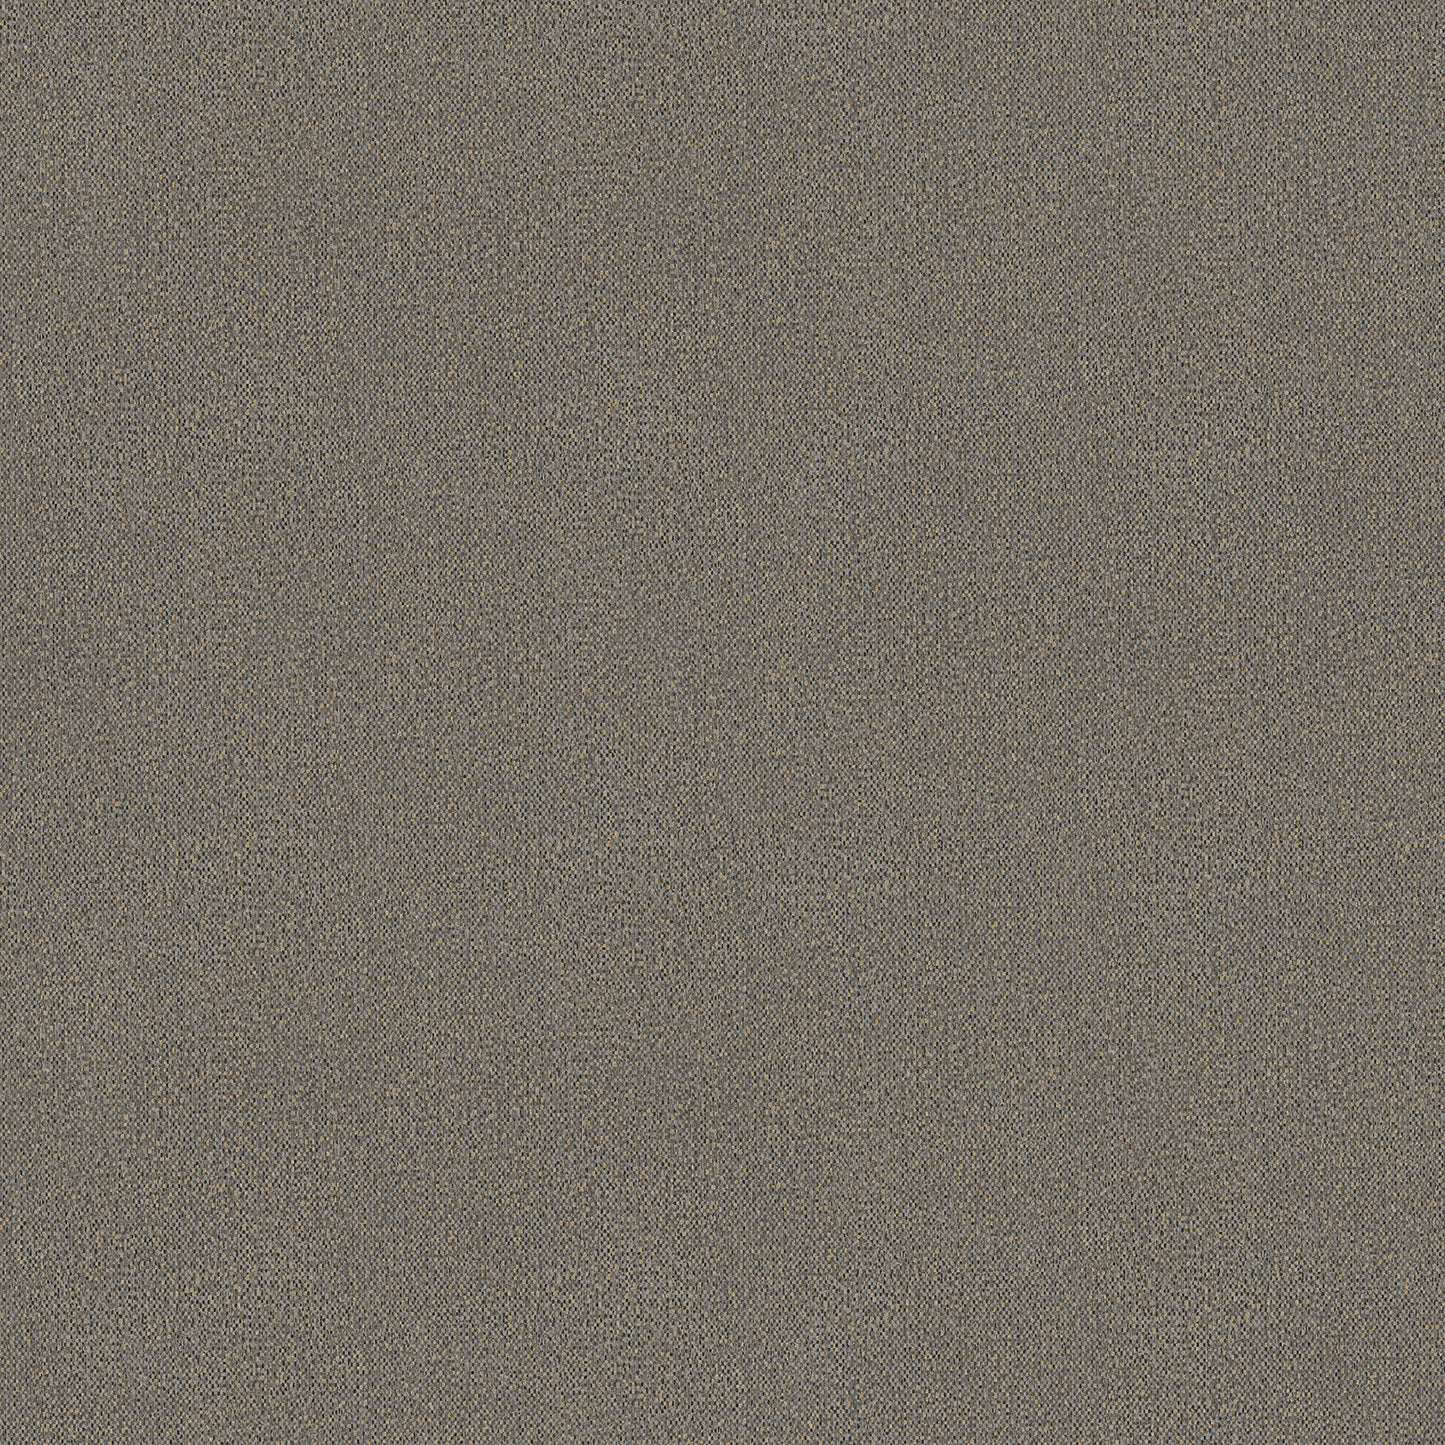 Select 4015-37374-1 Beyond Textures Hanalei Brown Fabric Texture Brown by Advantage